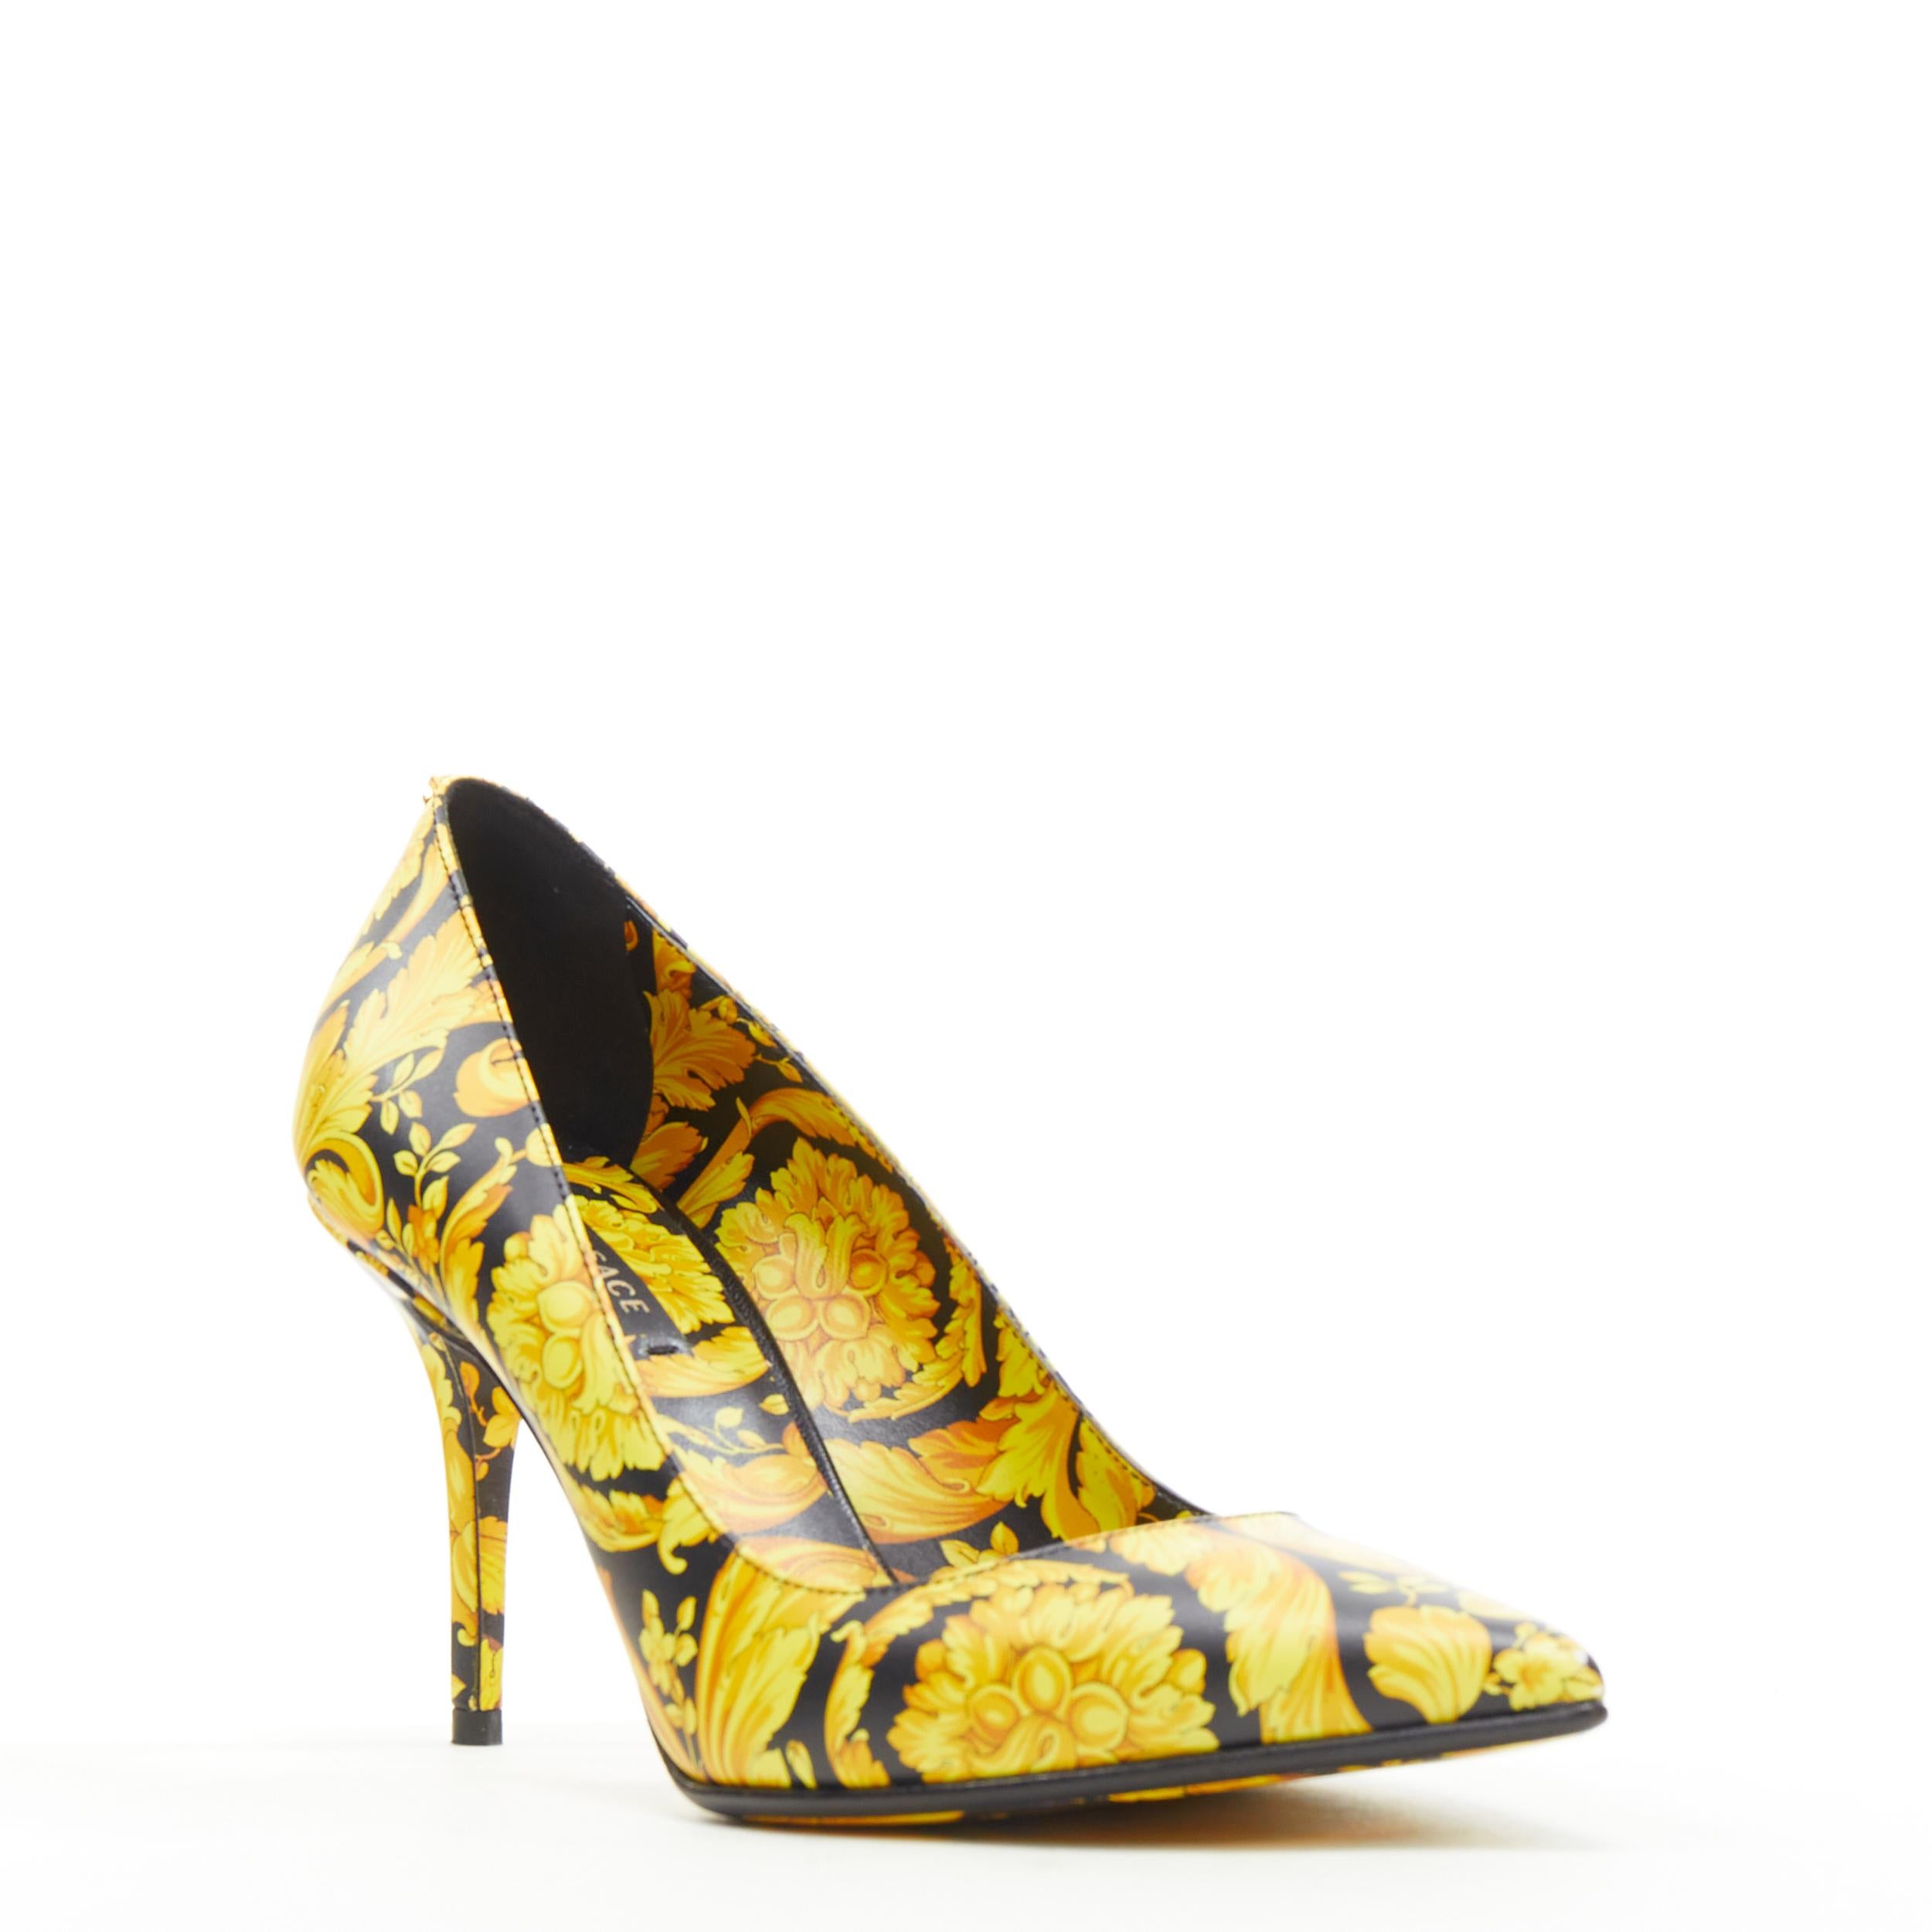 new VERSACE gold black barocco print allover pigalle high heel pump EU37.5 
Reference: TGAS/B00528 
Brand: Versace 
Designer: Donatella Versace 
Model: Barocco pump 
Collection: Spring Summer 2018 Tribute Collection 
Material: Leather 
Color: Gold